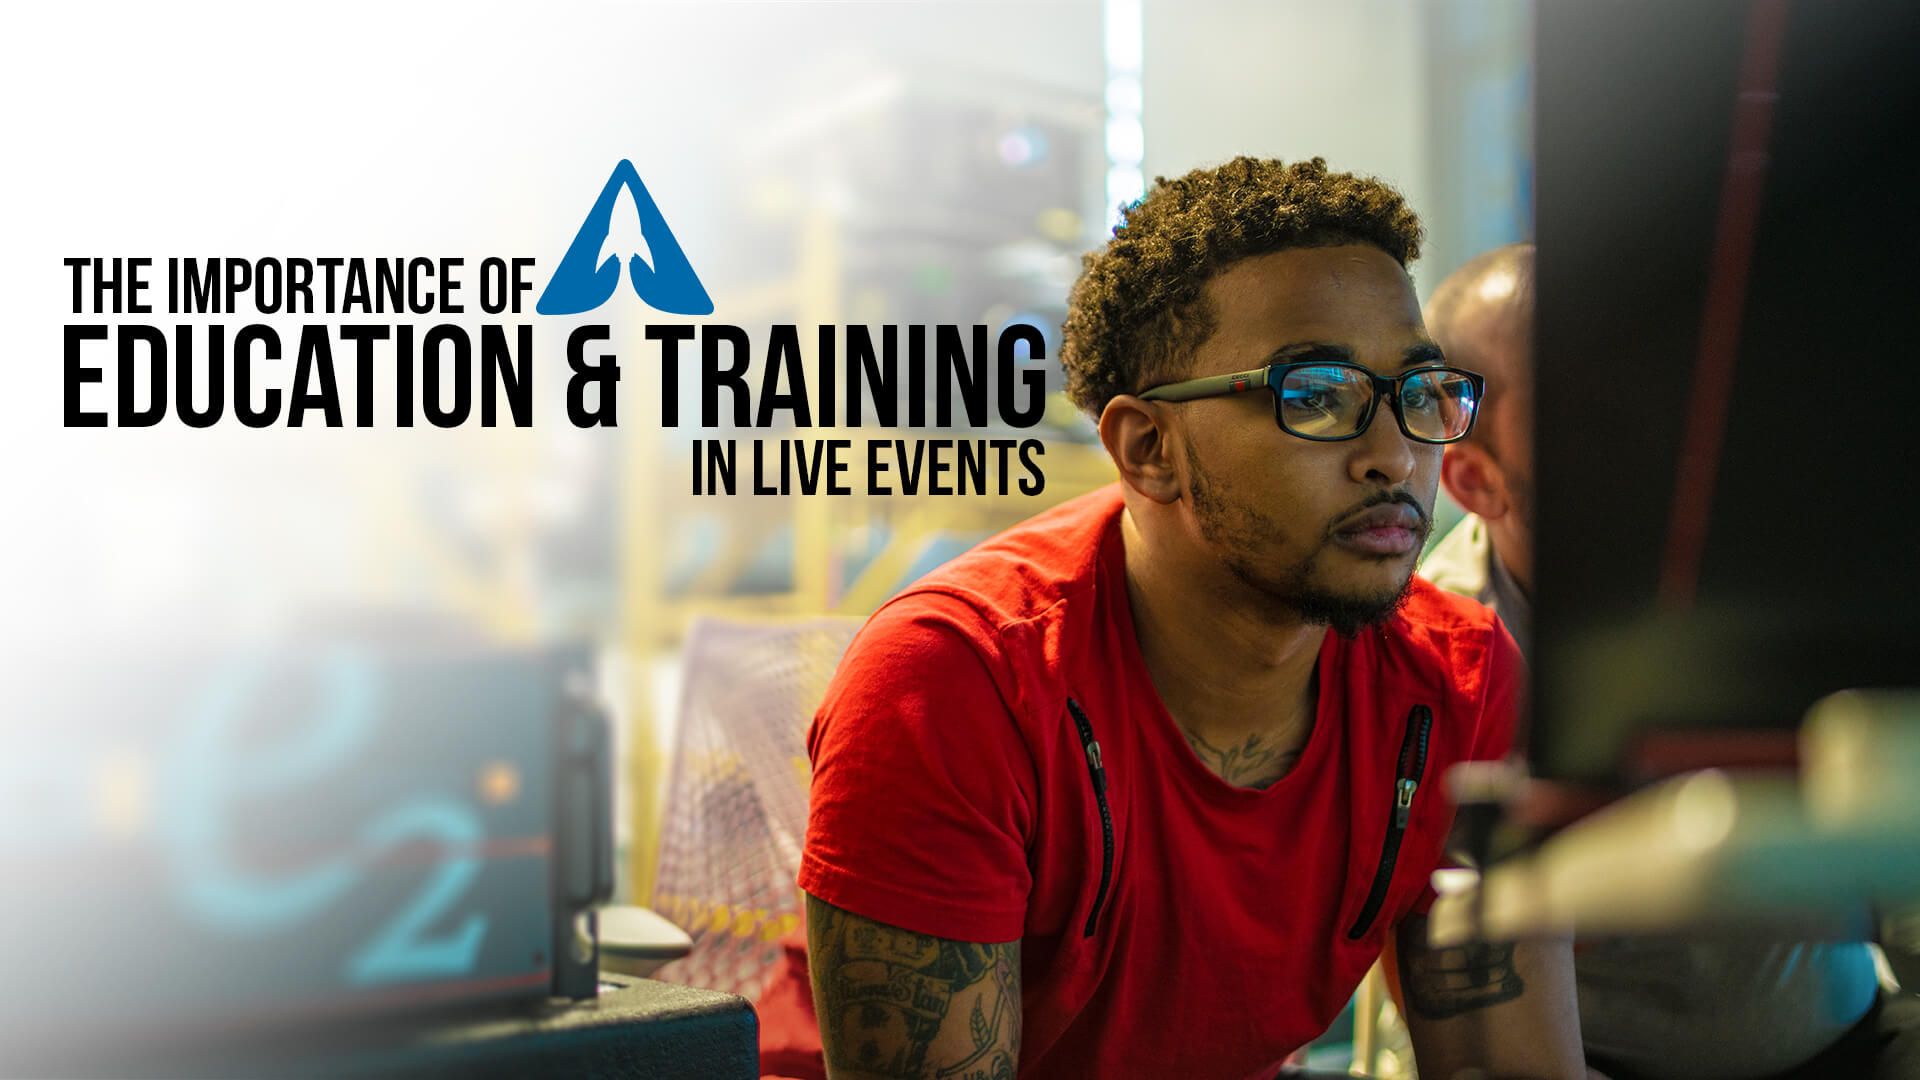 The importance of education and training live events.